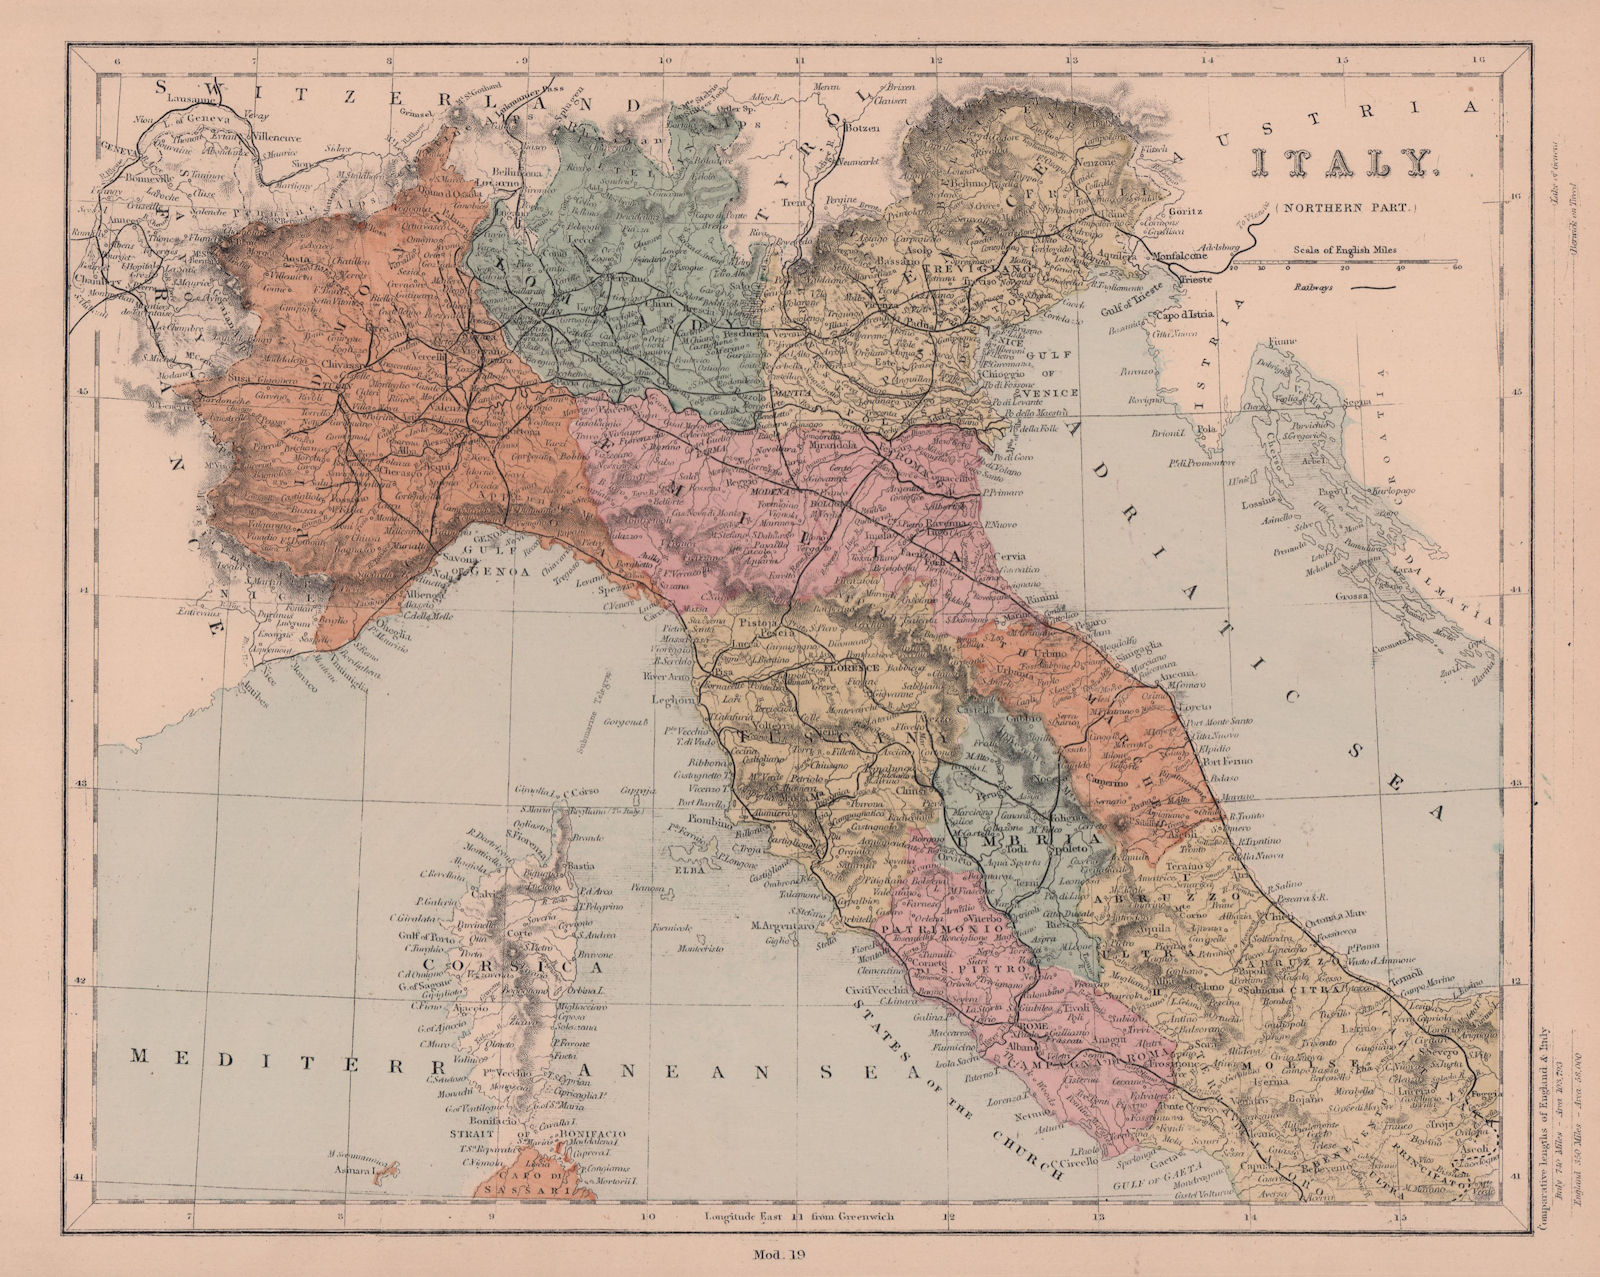 Associate Product Northern Italy. Railways. HUGHES 1876 old antique vintage map plan chart